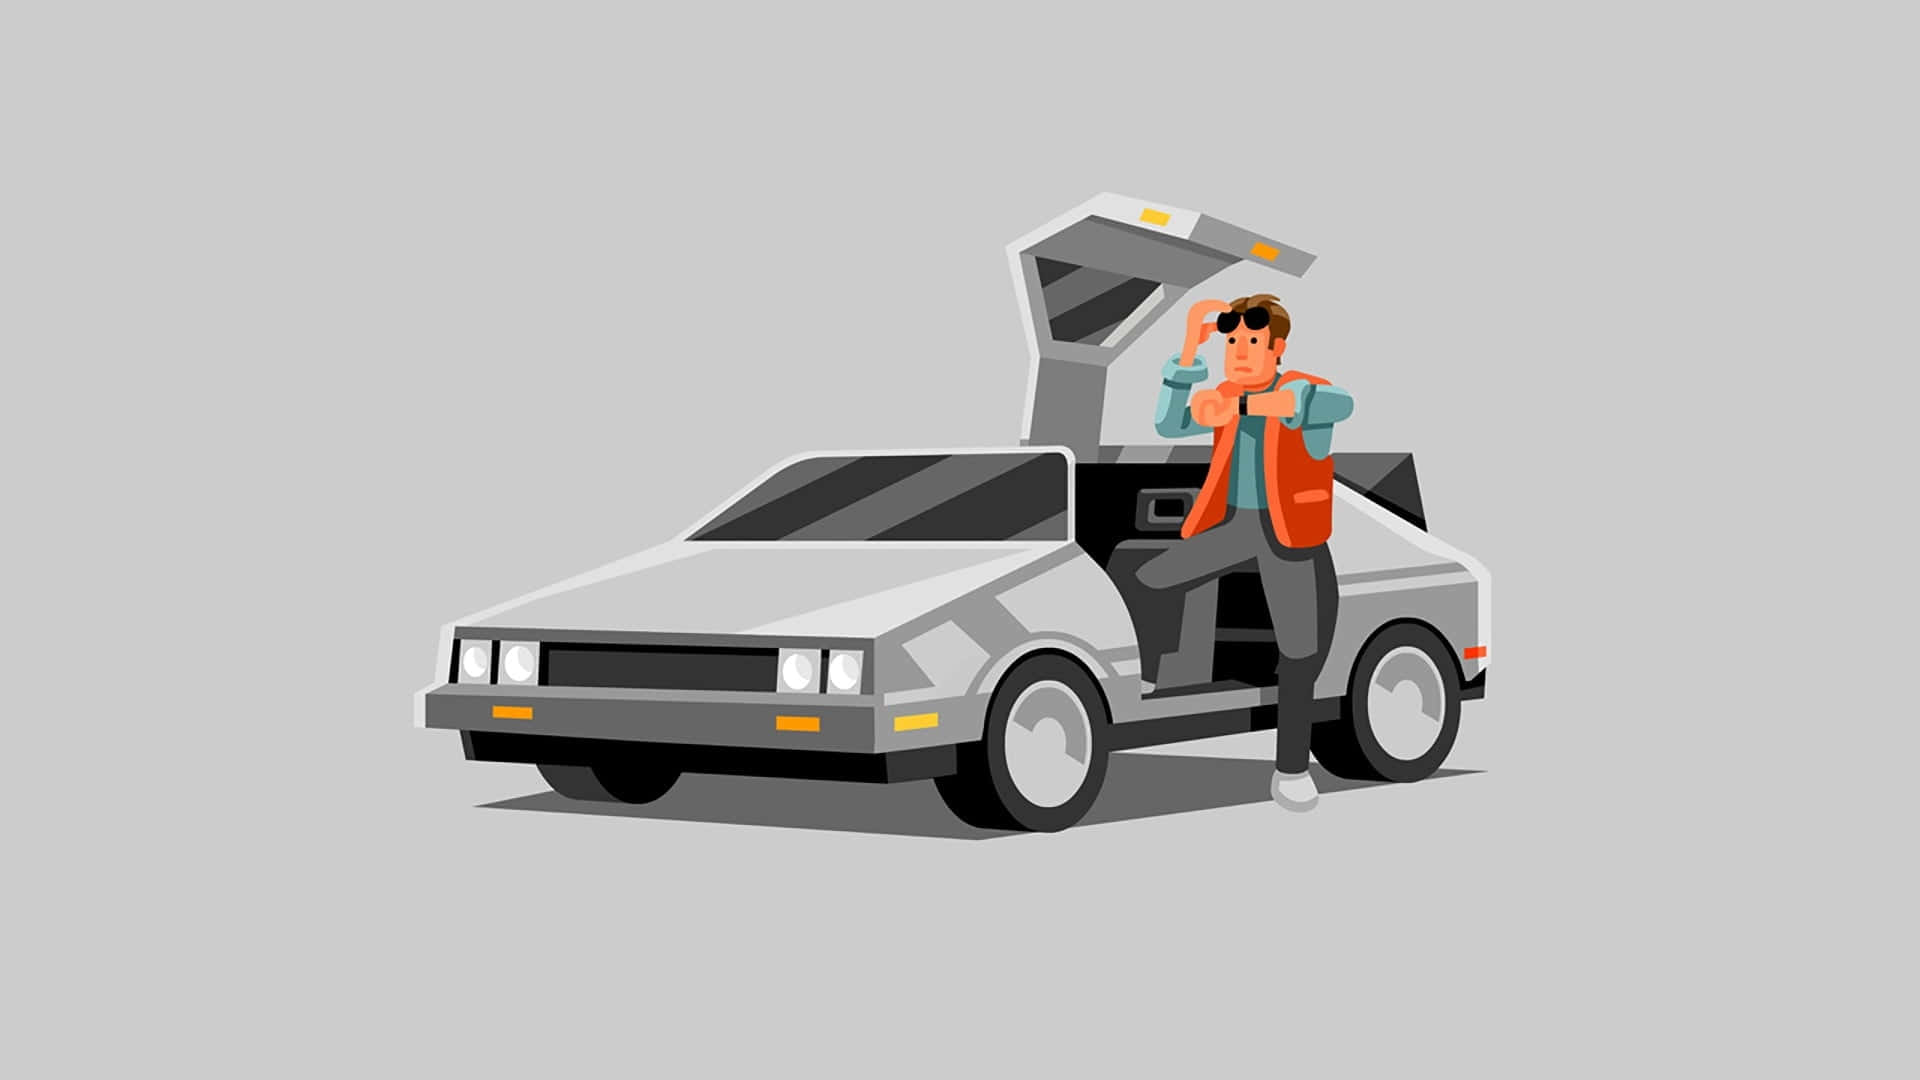 Back To The Future De Loreanand Character Wallpaper